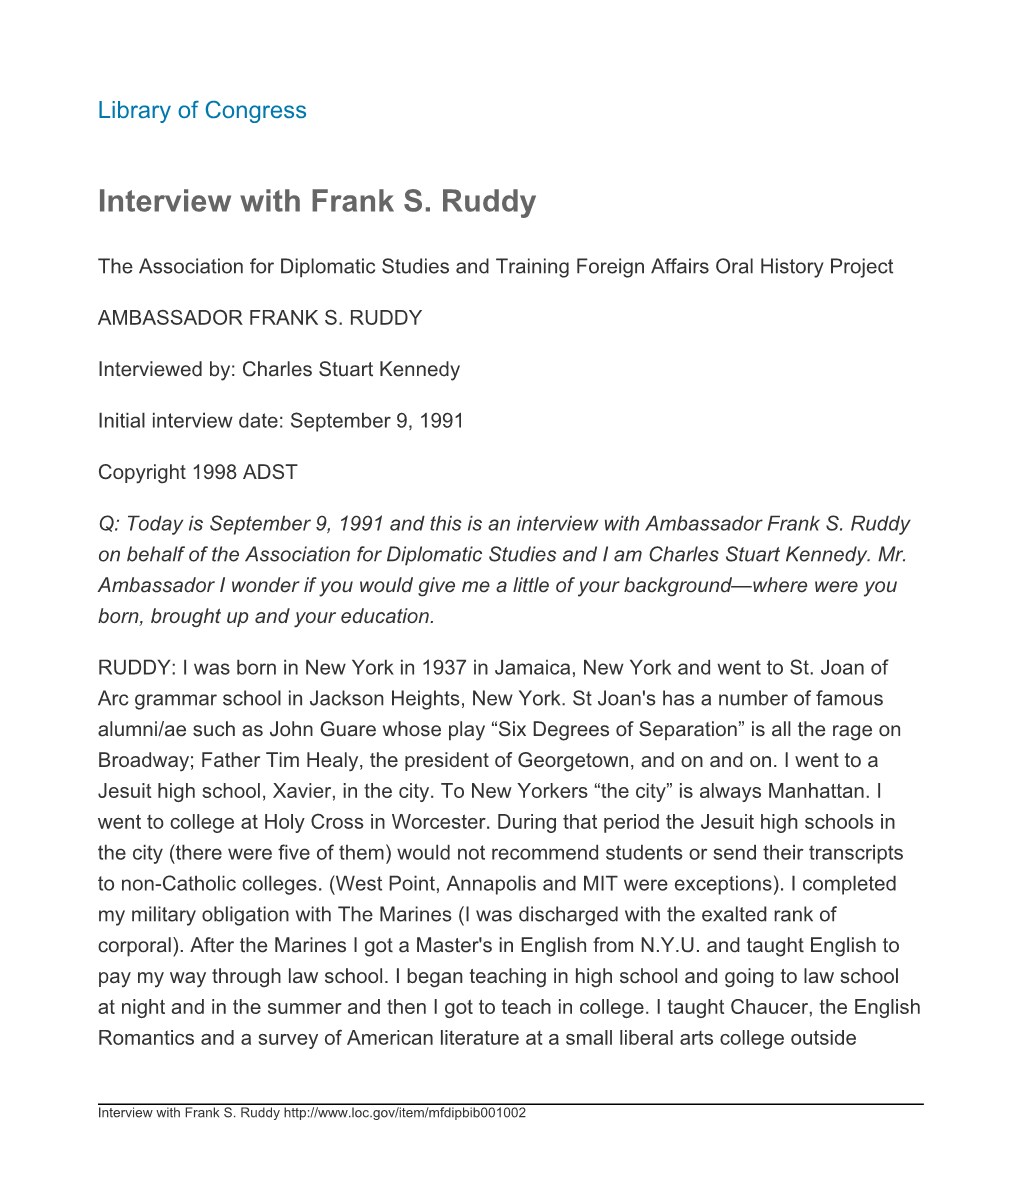 Interview with Frank S. Ruddy